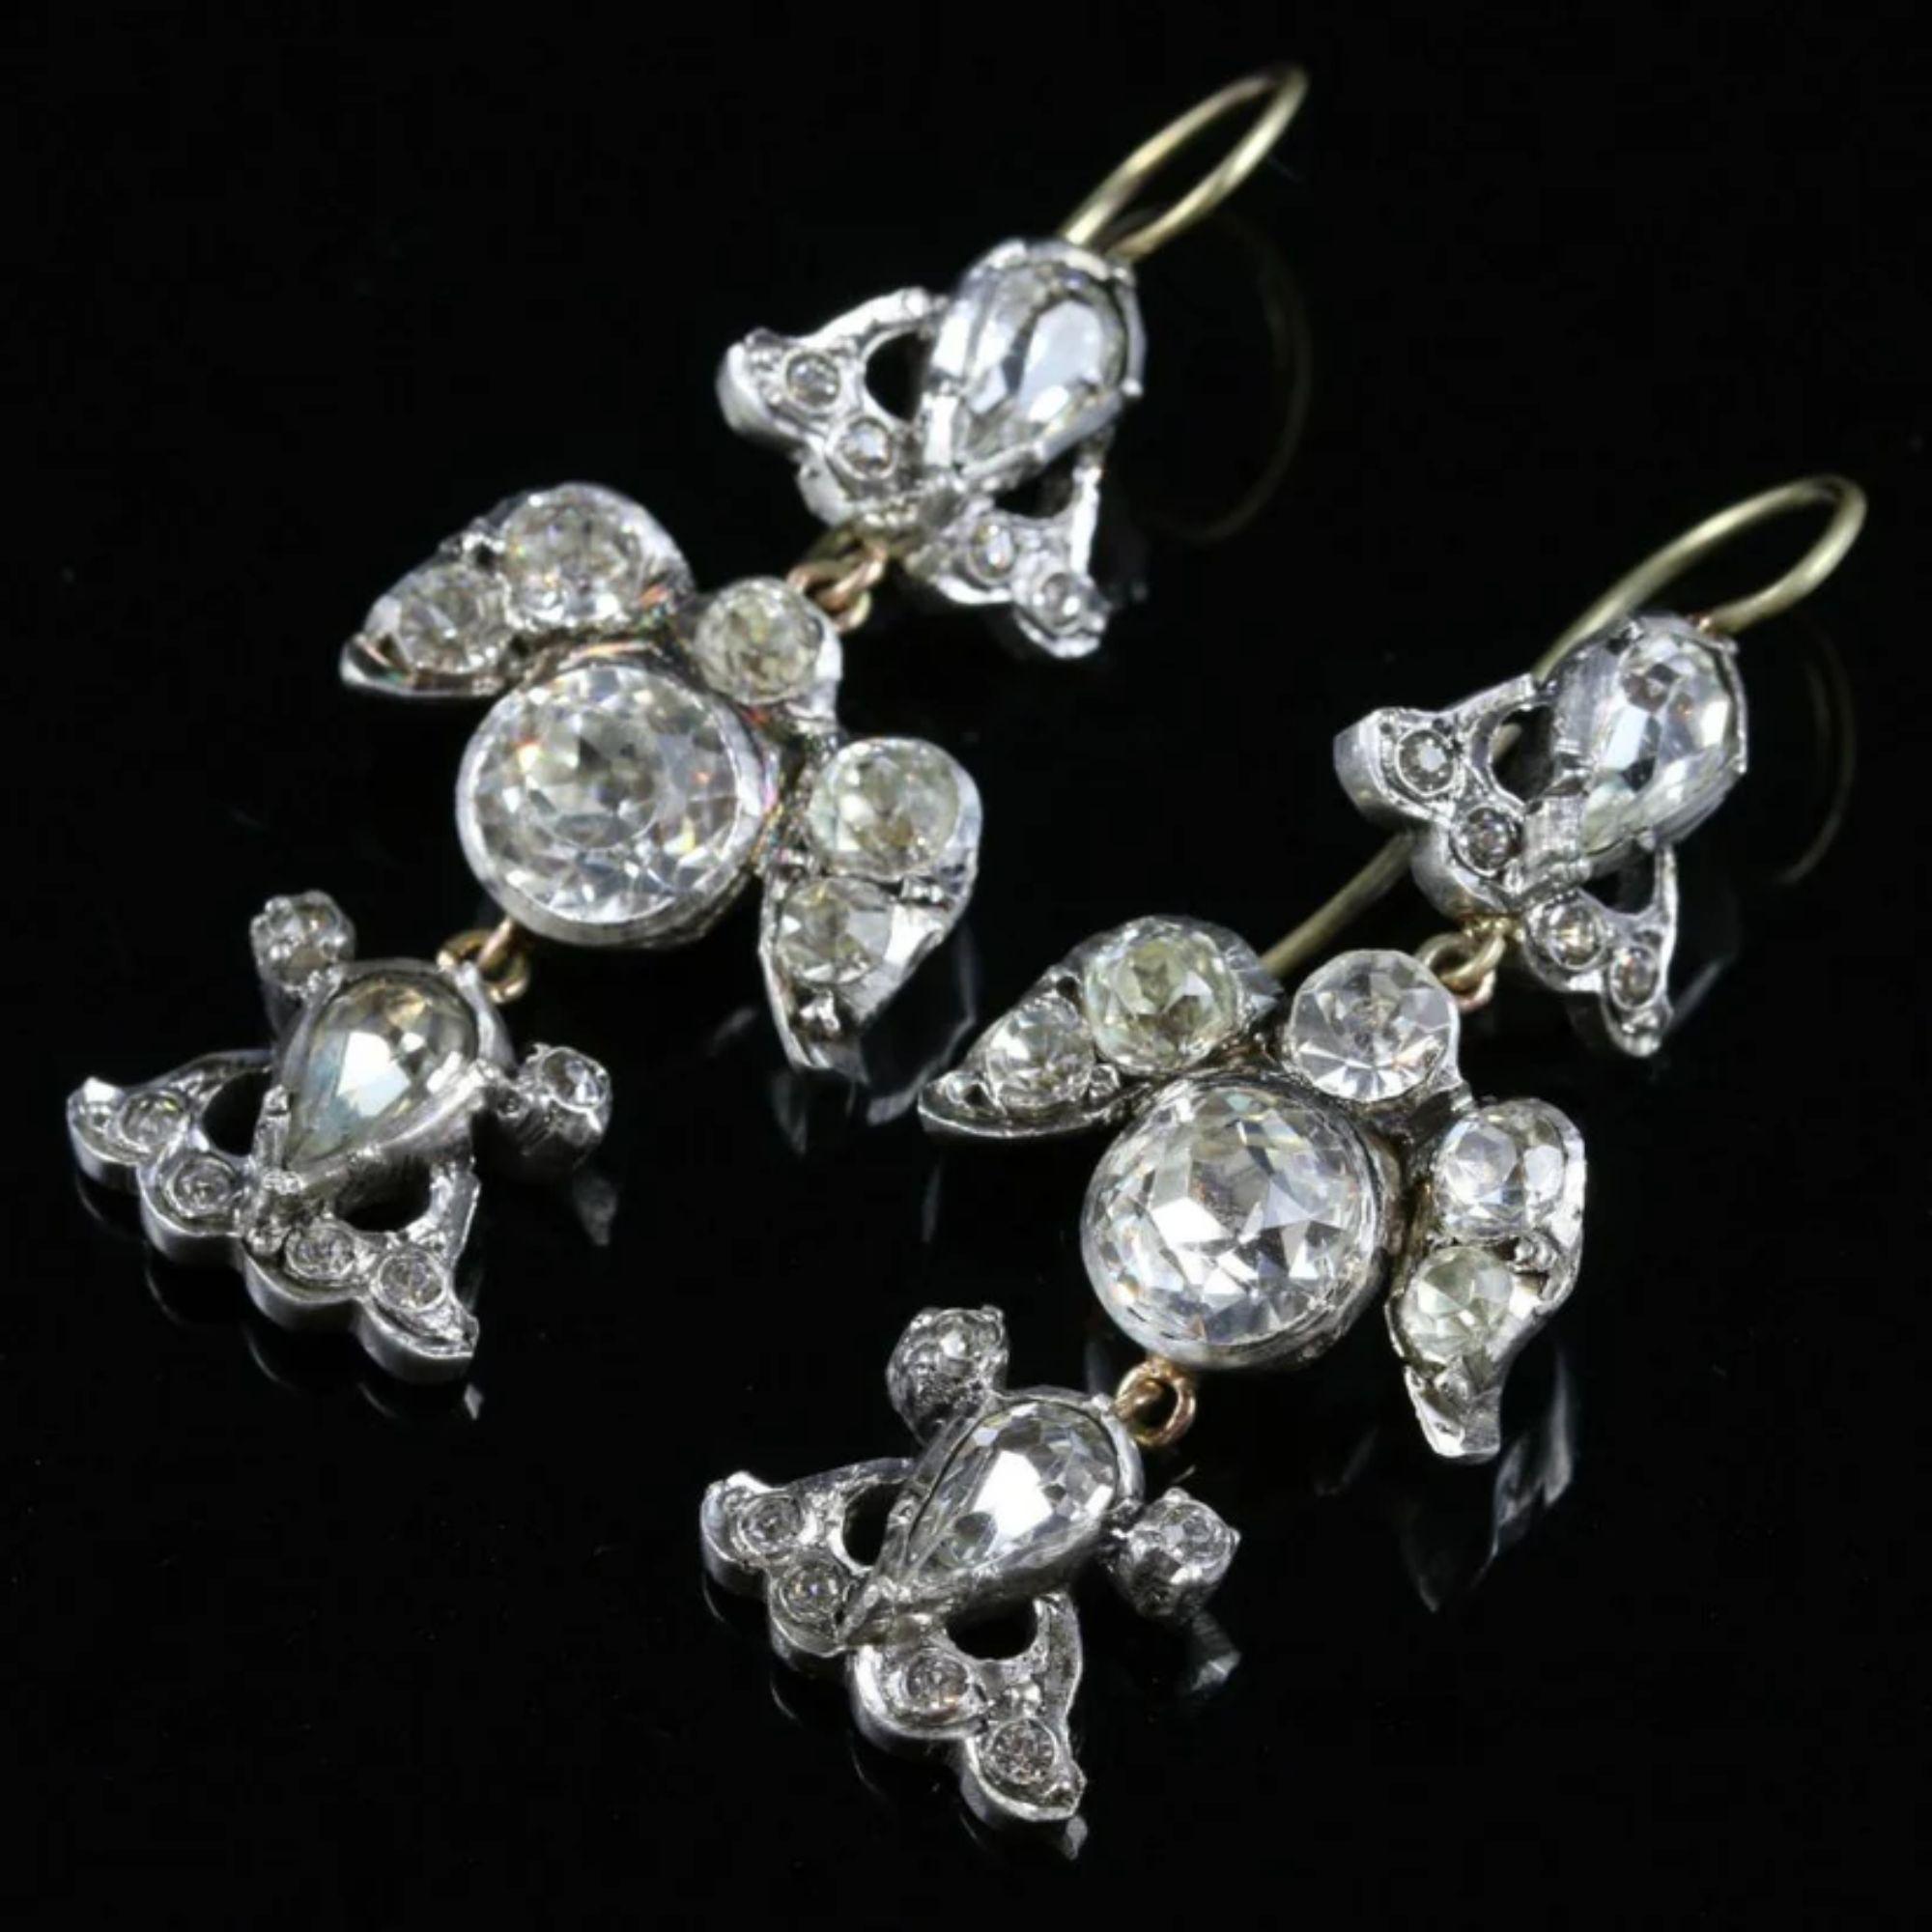 A fabulous pair of antique Georgian drop earrings from the early 1800s decorated with glistening old mine and pear cut paste stones collet set in fancy galleries that together resemble two birds.

Paste is a transparent flint glass that is cut to